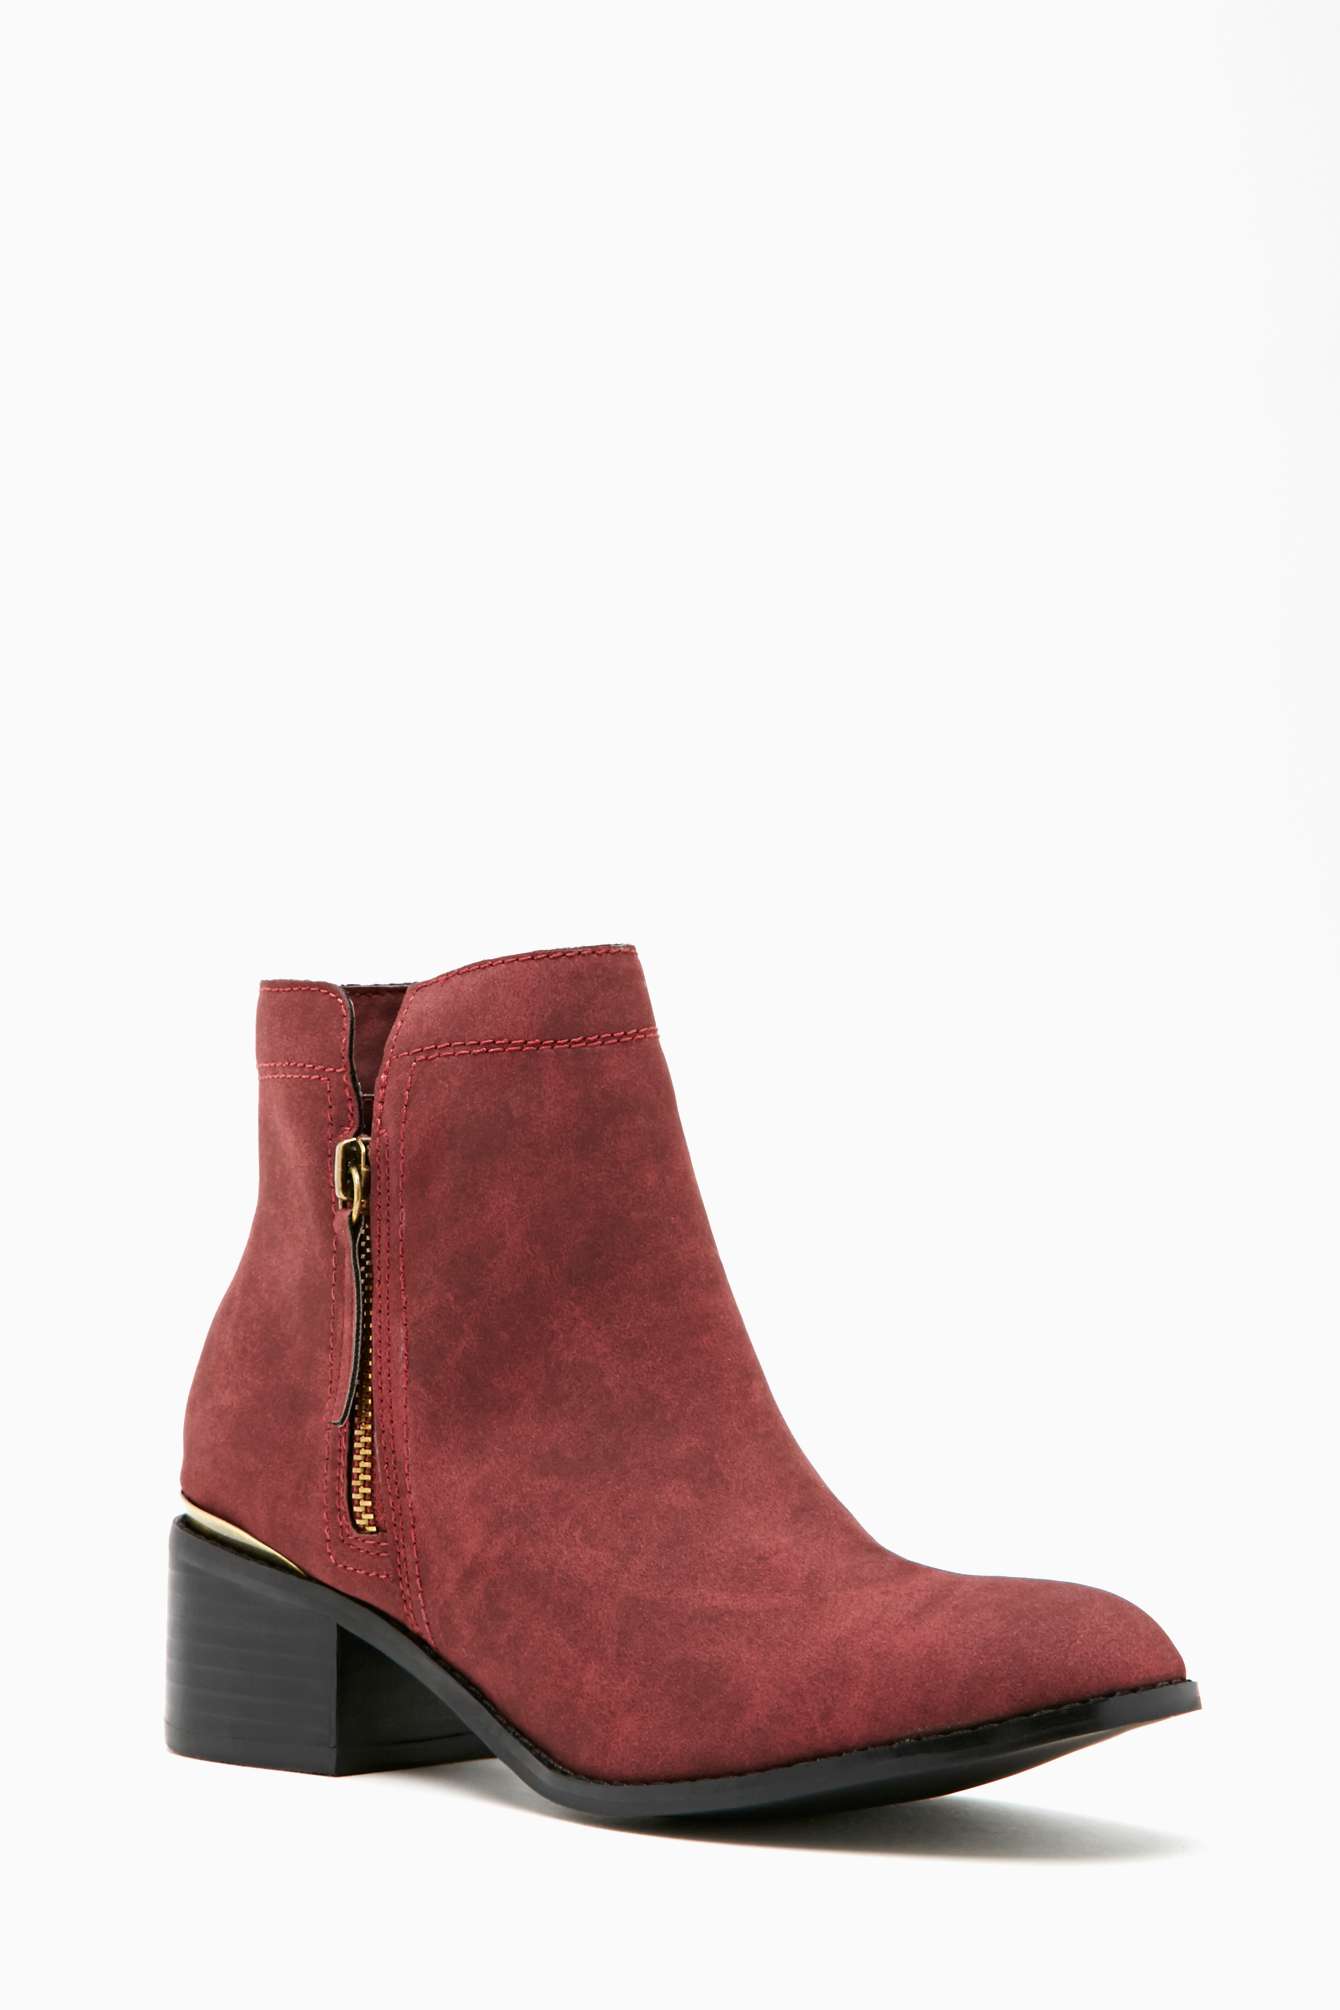 Lyst - Nasty Gal Shoe Cult Drago Ankle Boots in Red